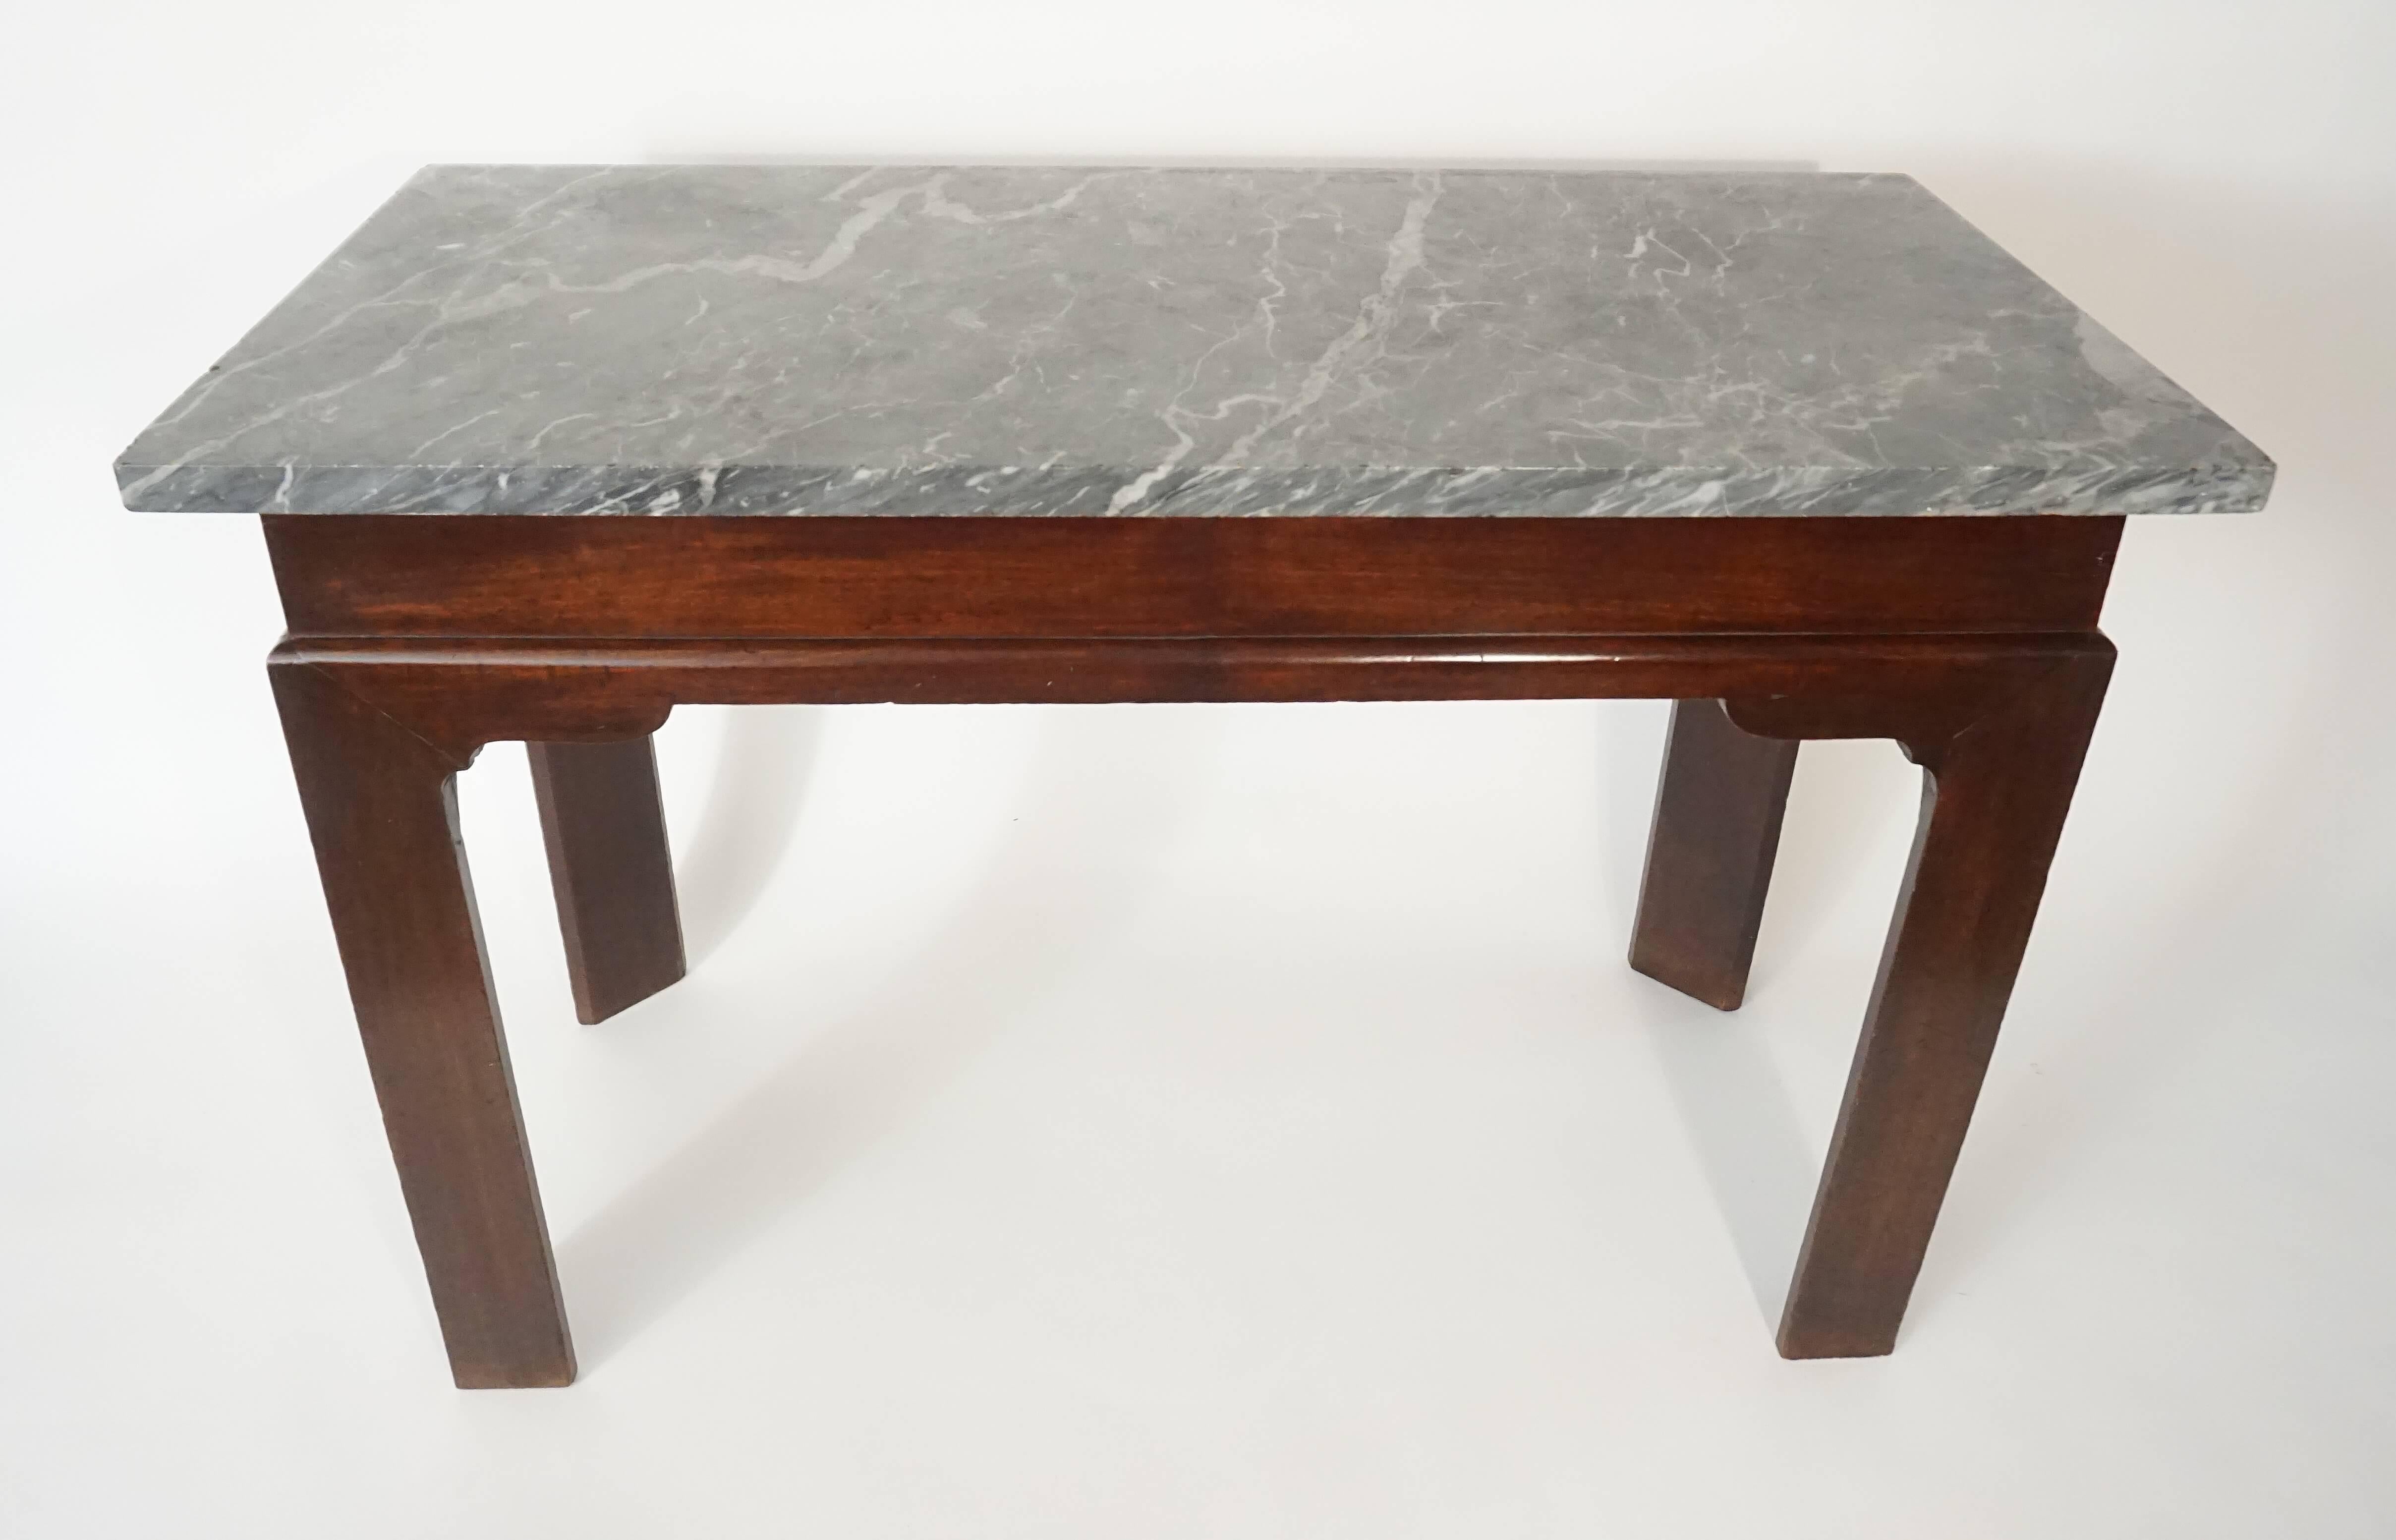 Hand-Carved English Georgian Marble Top Mahogany Slab or Side Table, circa 1760 For Sale